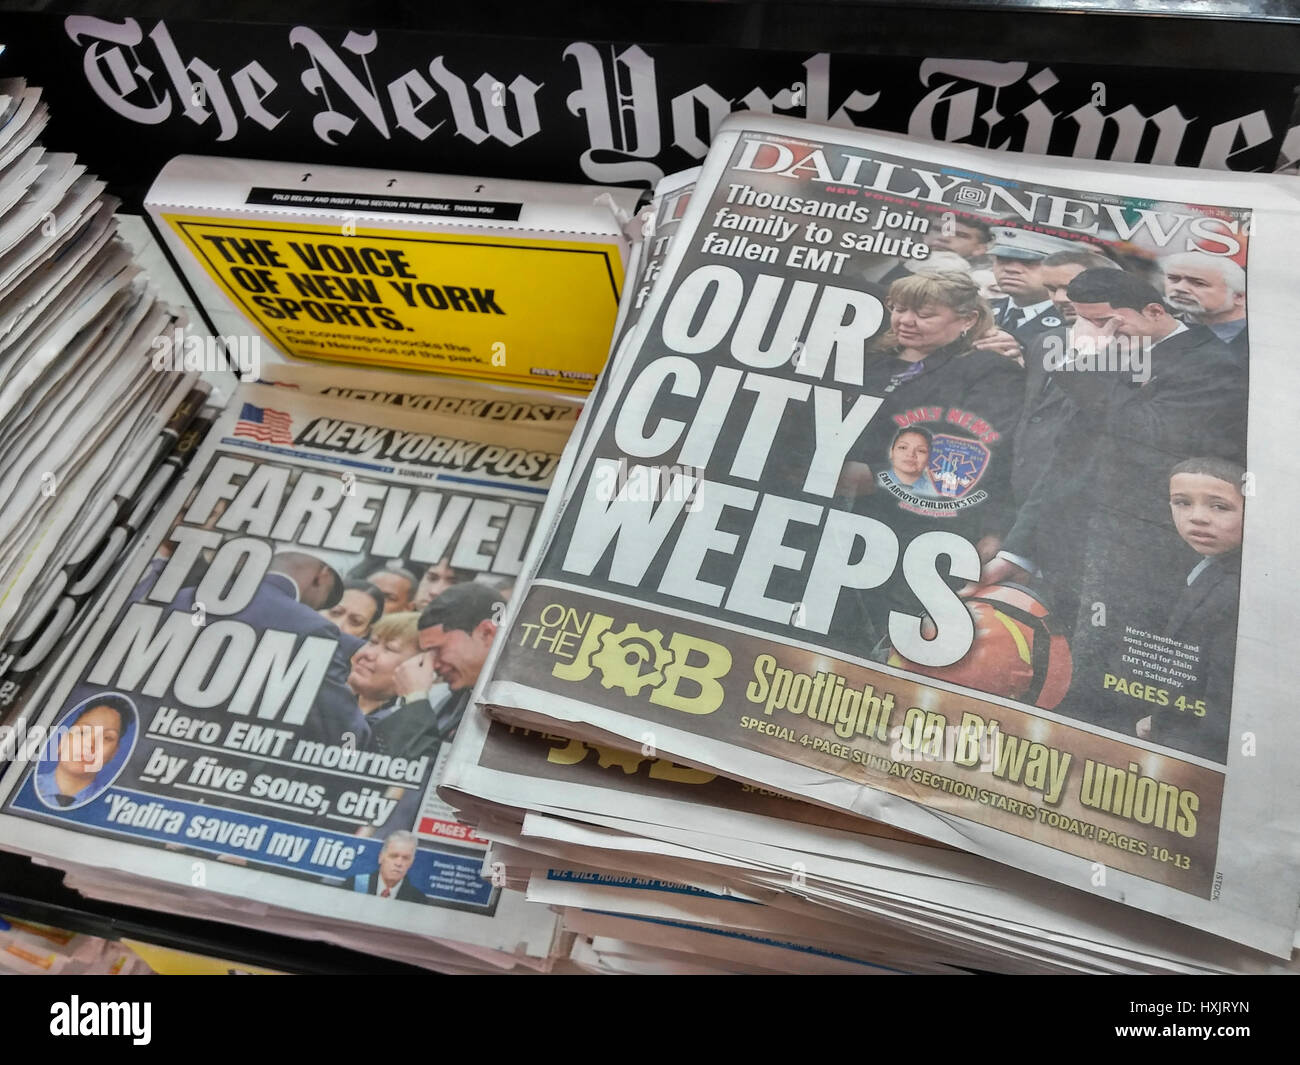 The front pages of New York tabloid newspapers on Sunday, March 26, 2017 report on the previous day's funeral of EMT Yadira Arroyo. The Emergency Medial Technician was killed when she was run over allegedly by Jose Gonzalez as Gonzalez attempted to steal her ambulance. (© Richard B. Levine) Stock Photo